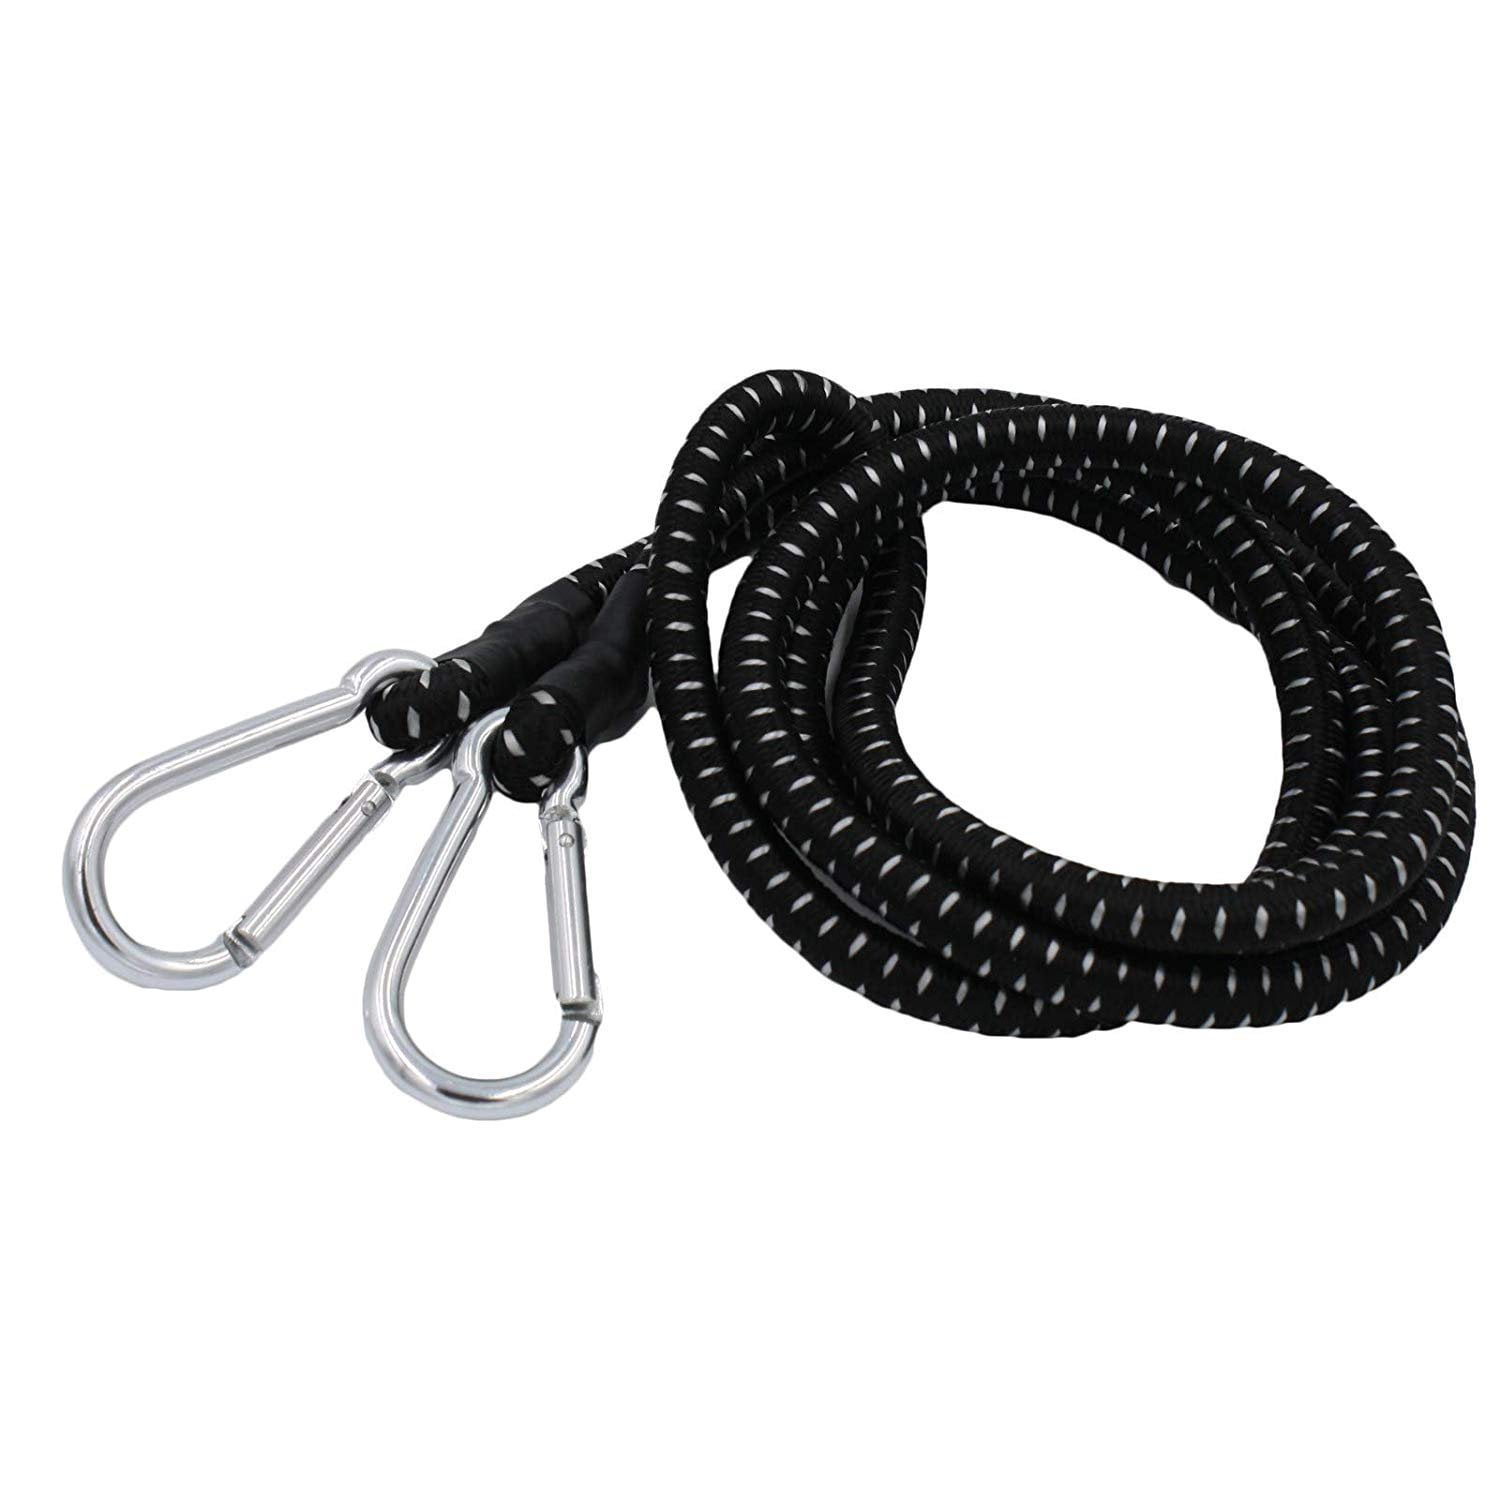 Wideskall 70 inch Heavy Duty Bungee Cord Black with 3 inch inch Carabiners Hooks Pack of 1, Size: 70 inch